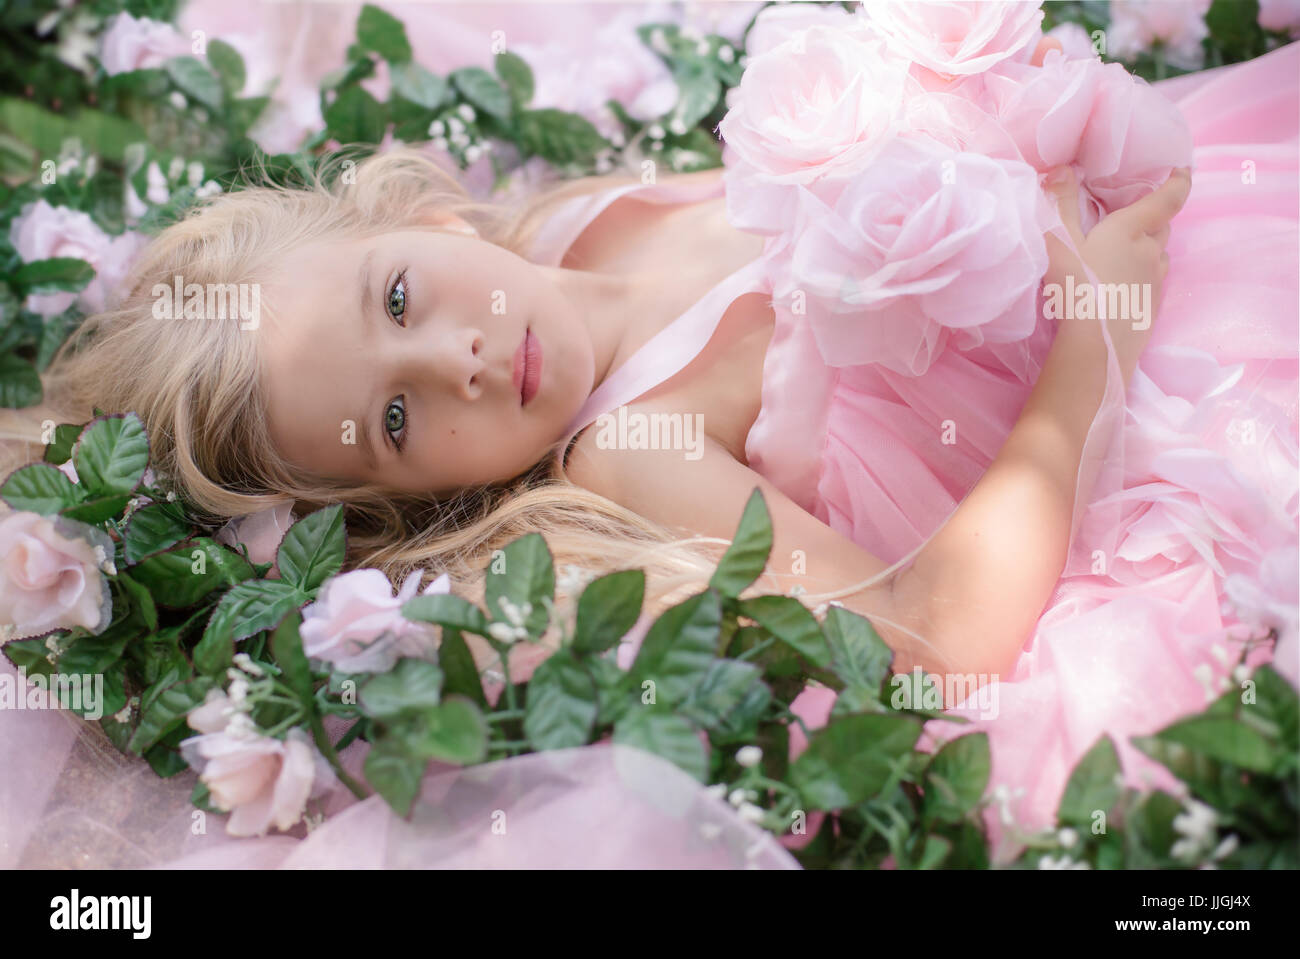 Girl in a vintage dress with roses lying amongst flowers, California, USA Stock Photo